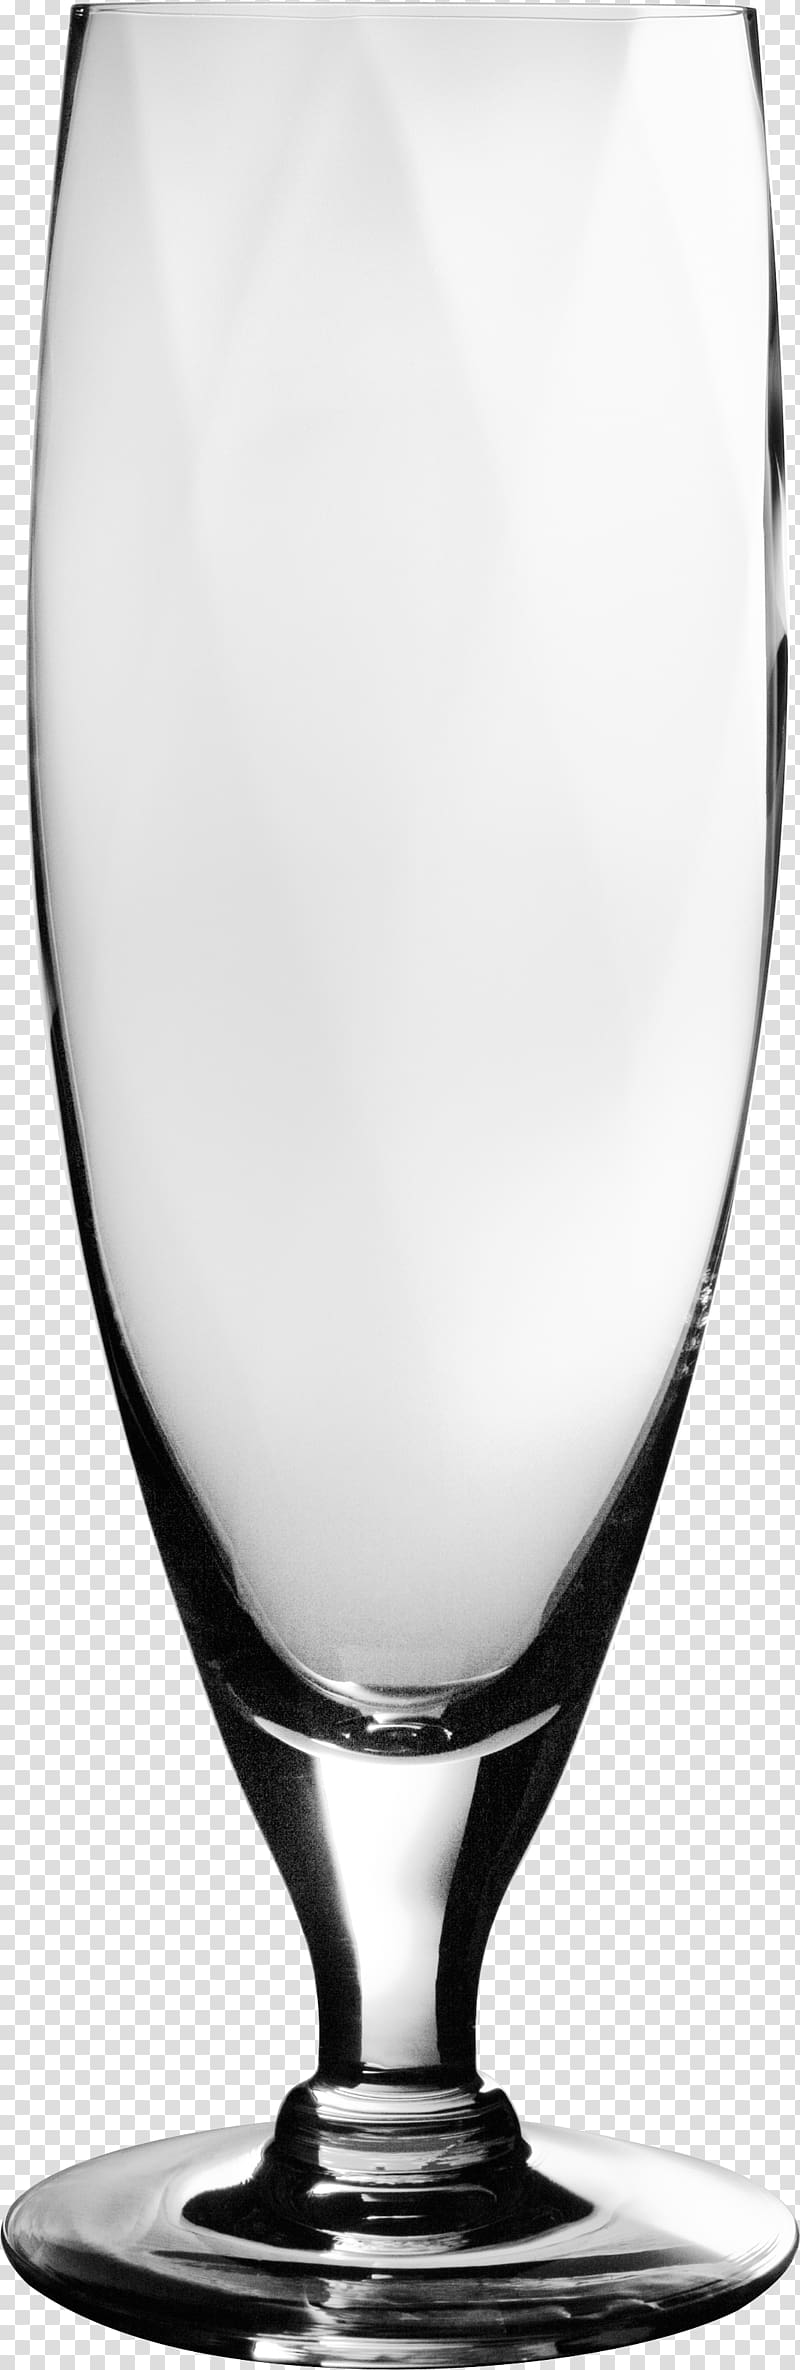 Glass, Empty wine glass transparent background PNG clipart